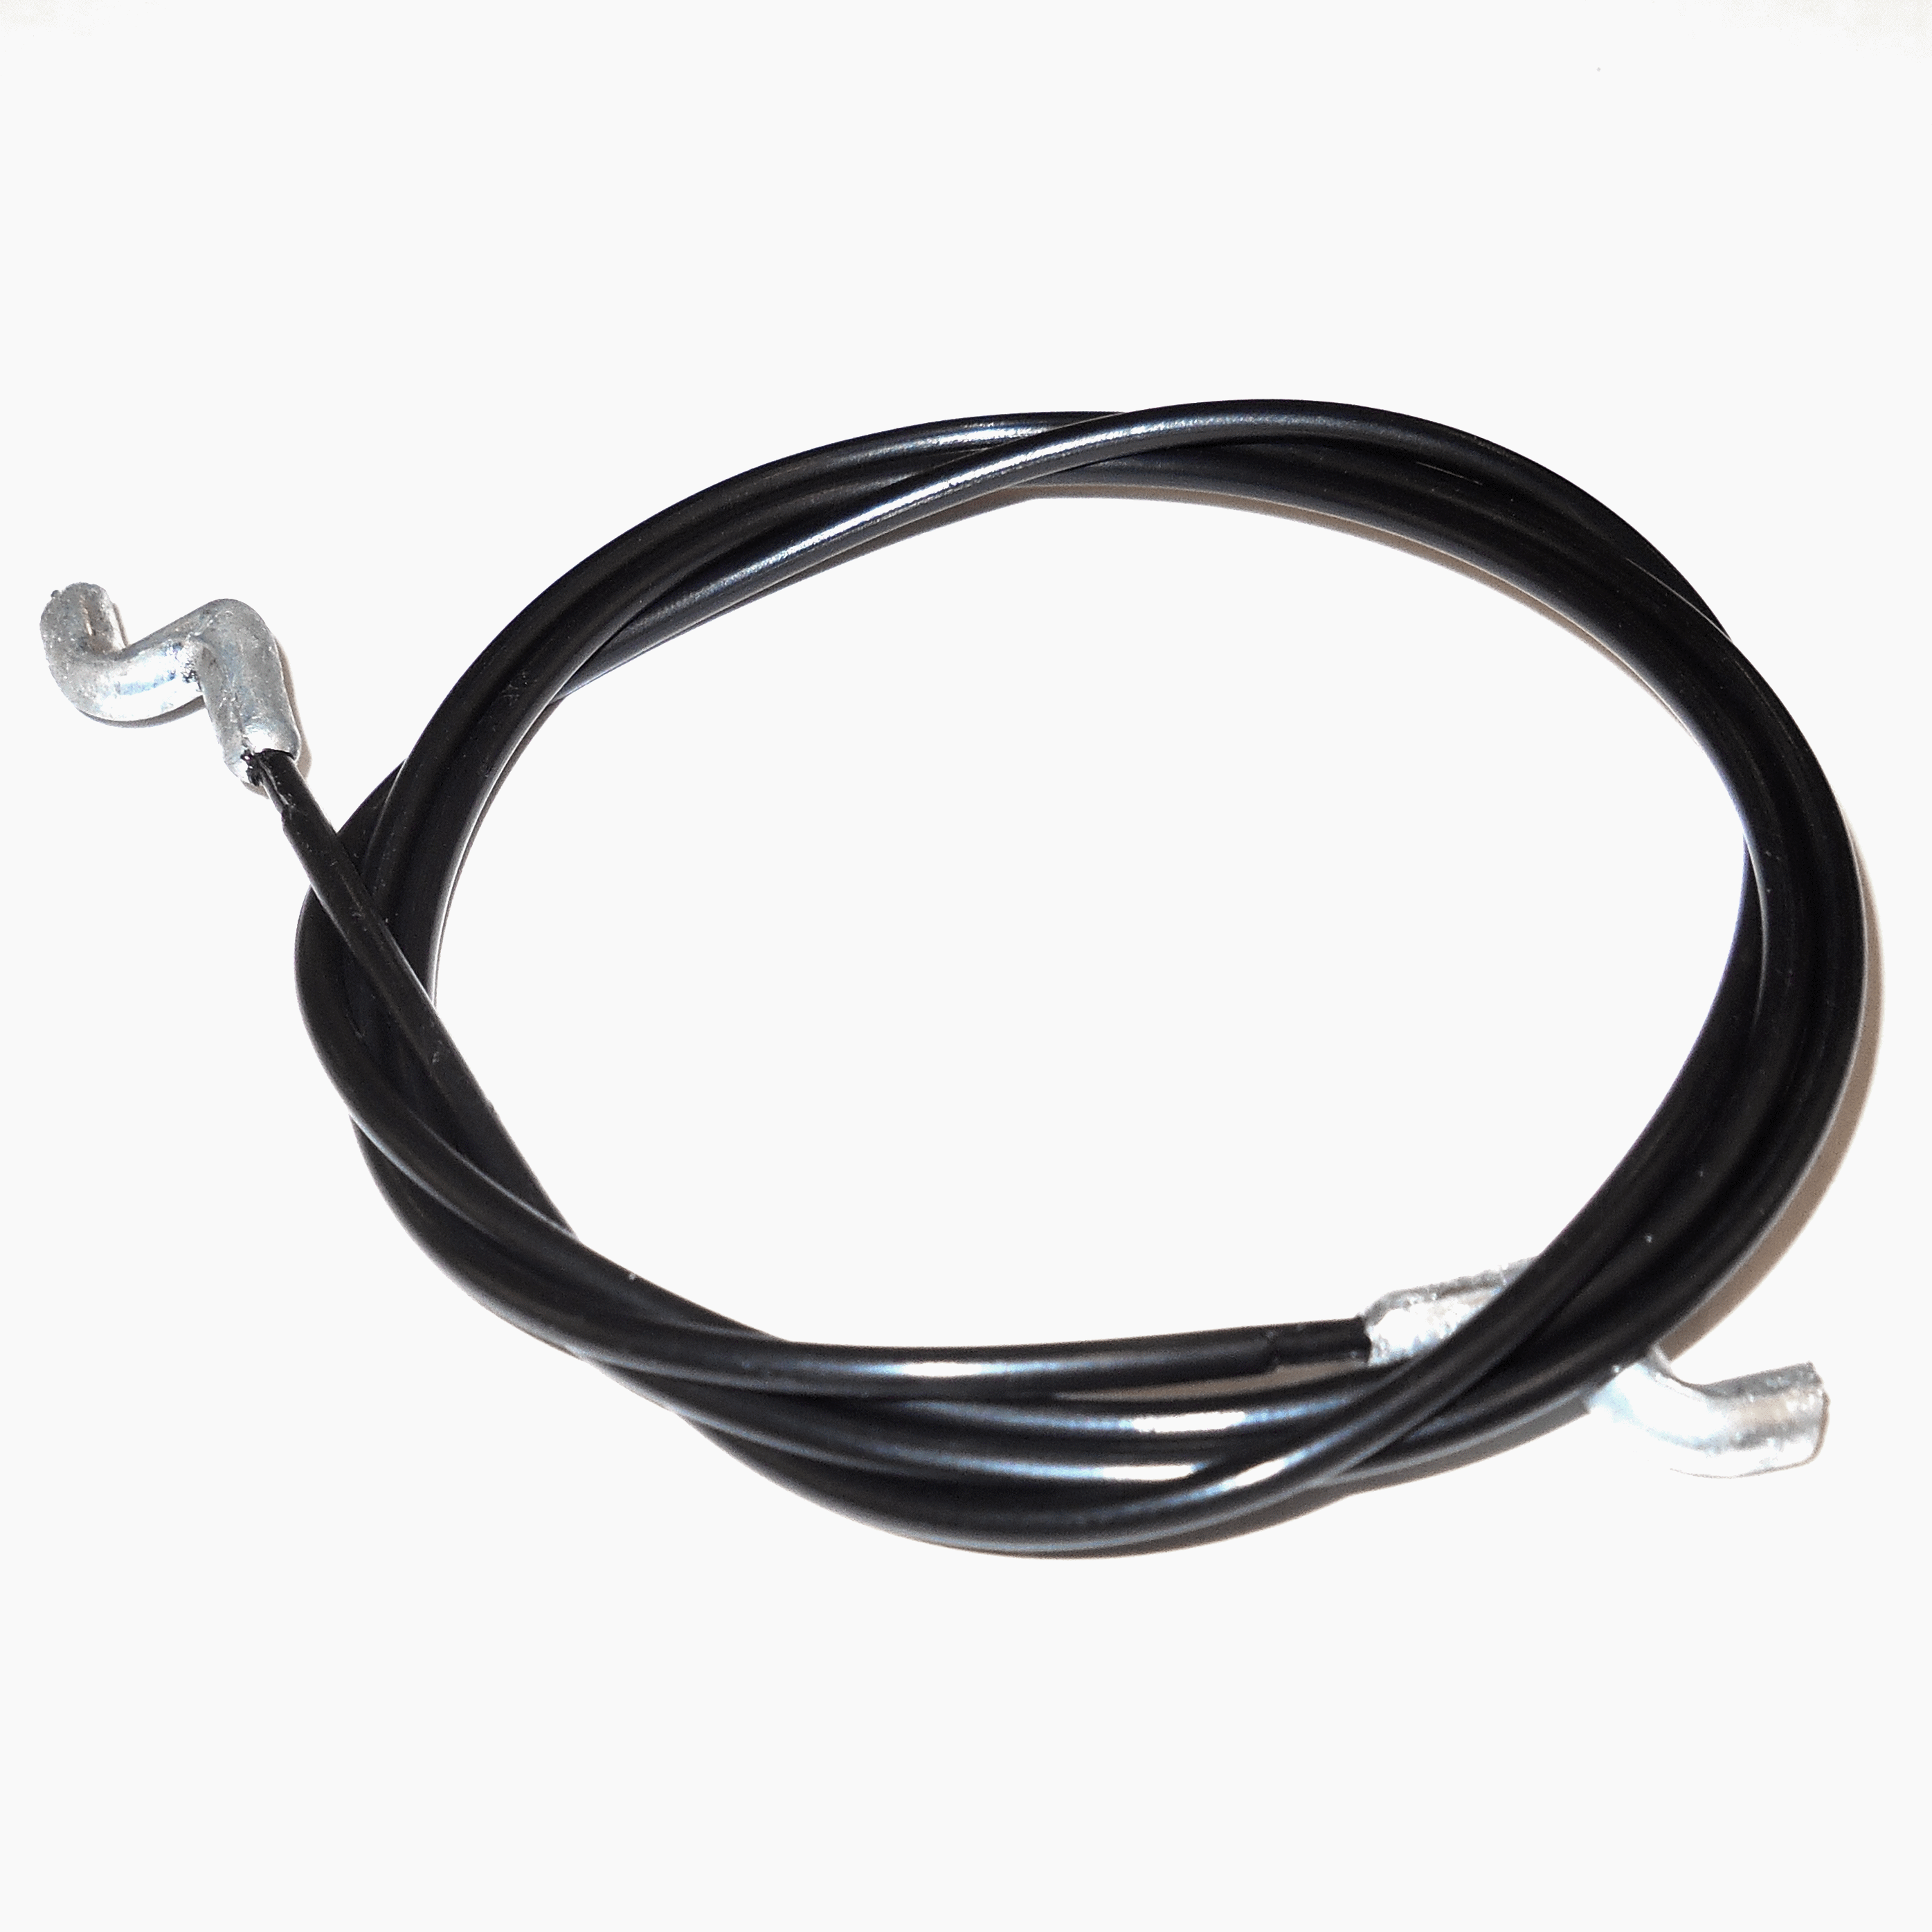 Cable-clutch - 55-9322:Toro